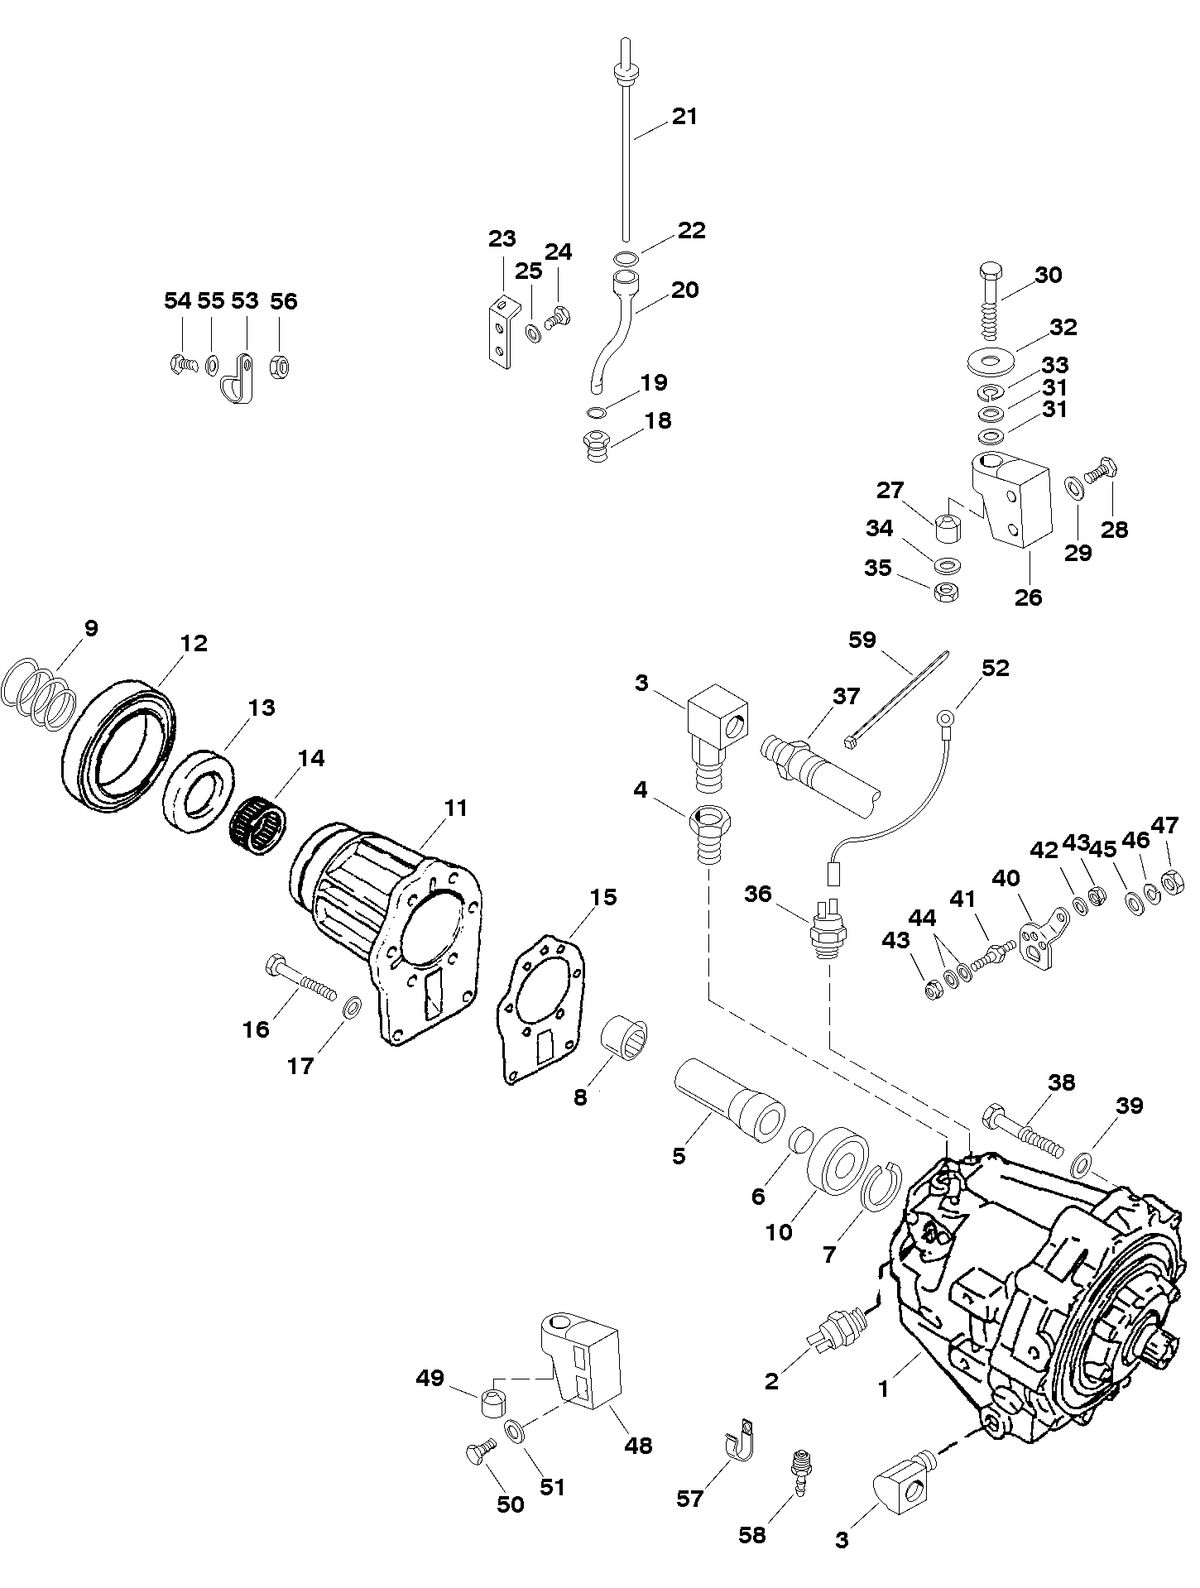 MERCRUISER 800 SC ENGINE TRANSMISSION COMPONENTS (PLUG IN) (PAGE 1 0F 2)